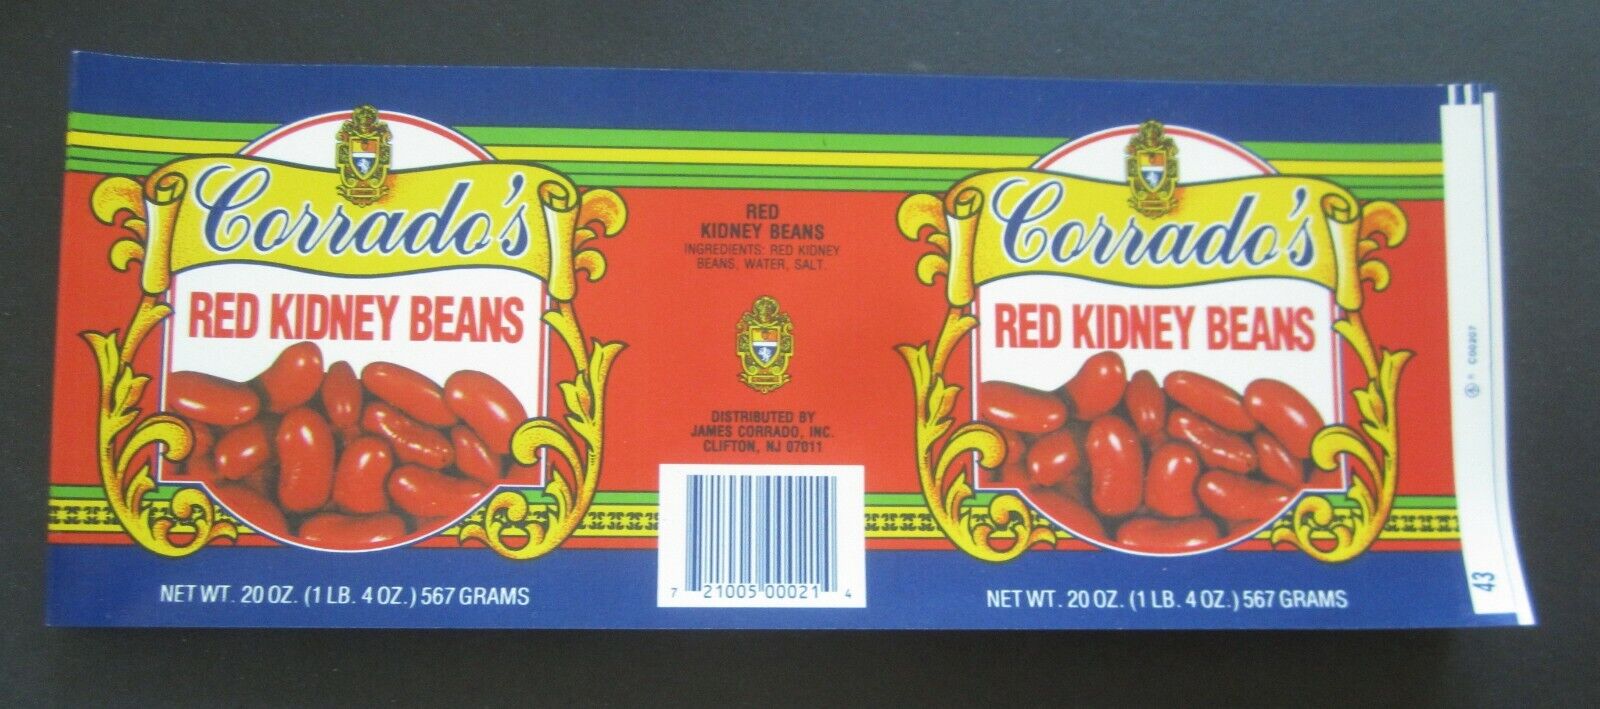 Wholesale Lot of 100 Old Vintage CORRADO\'S Red Kidney Bean CAN LABELS Clifton NJ